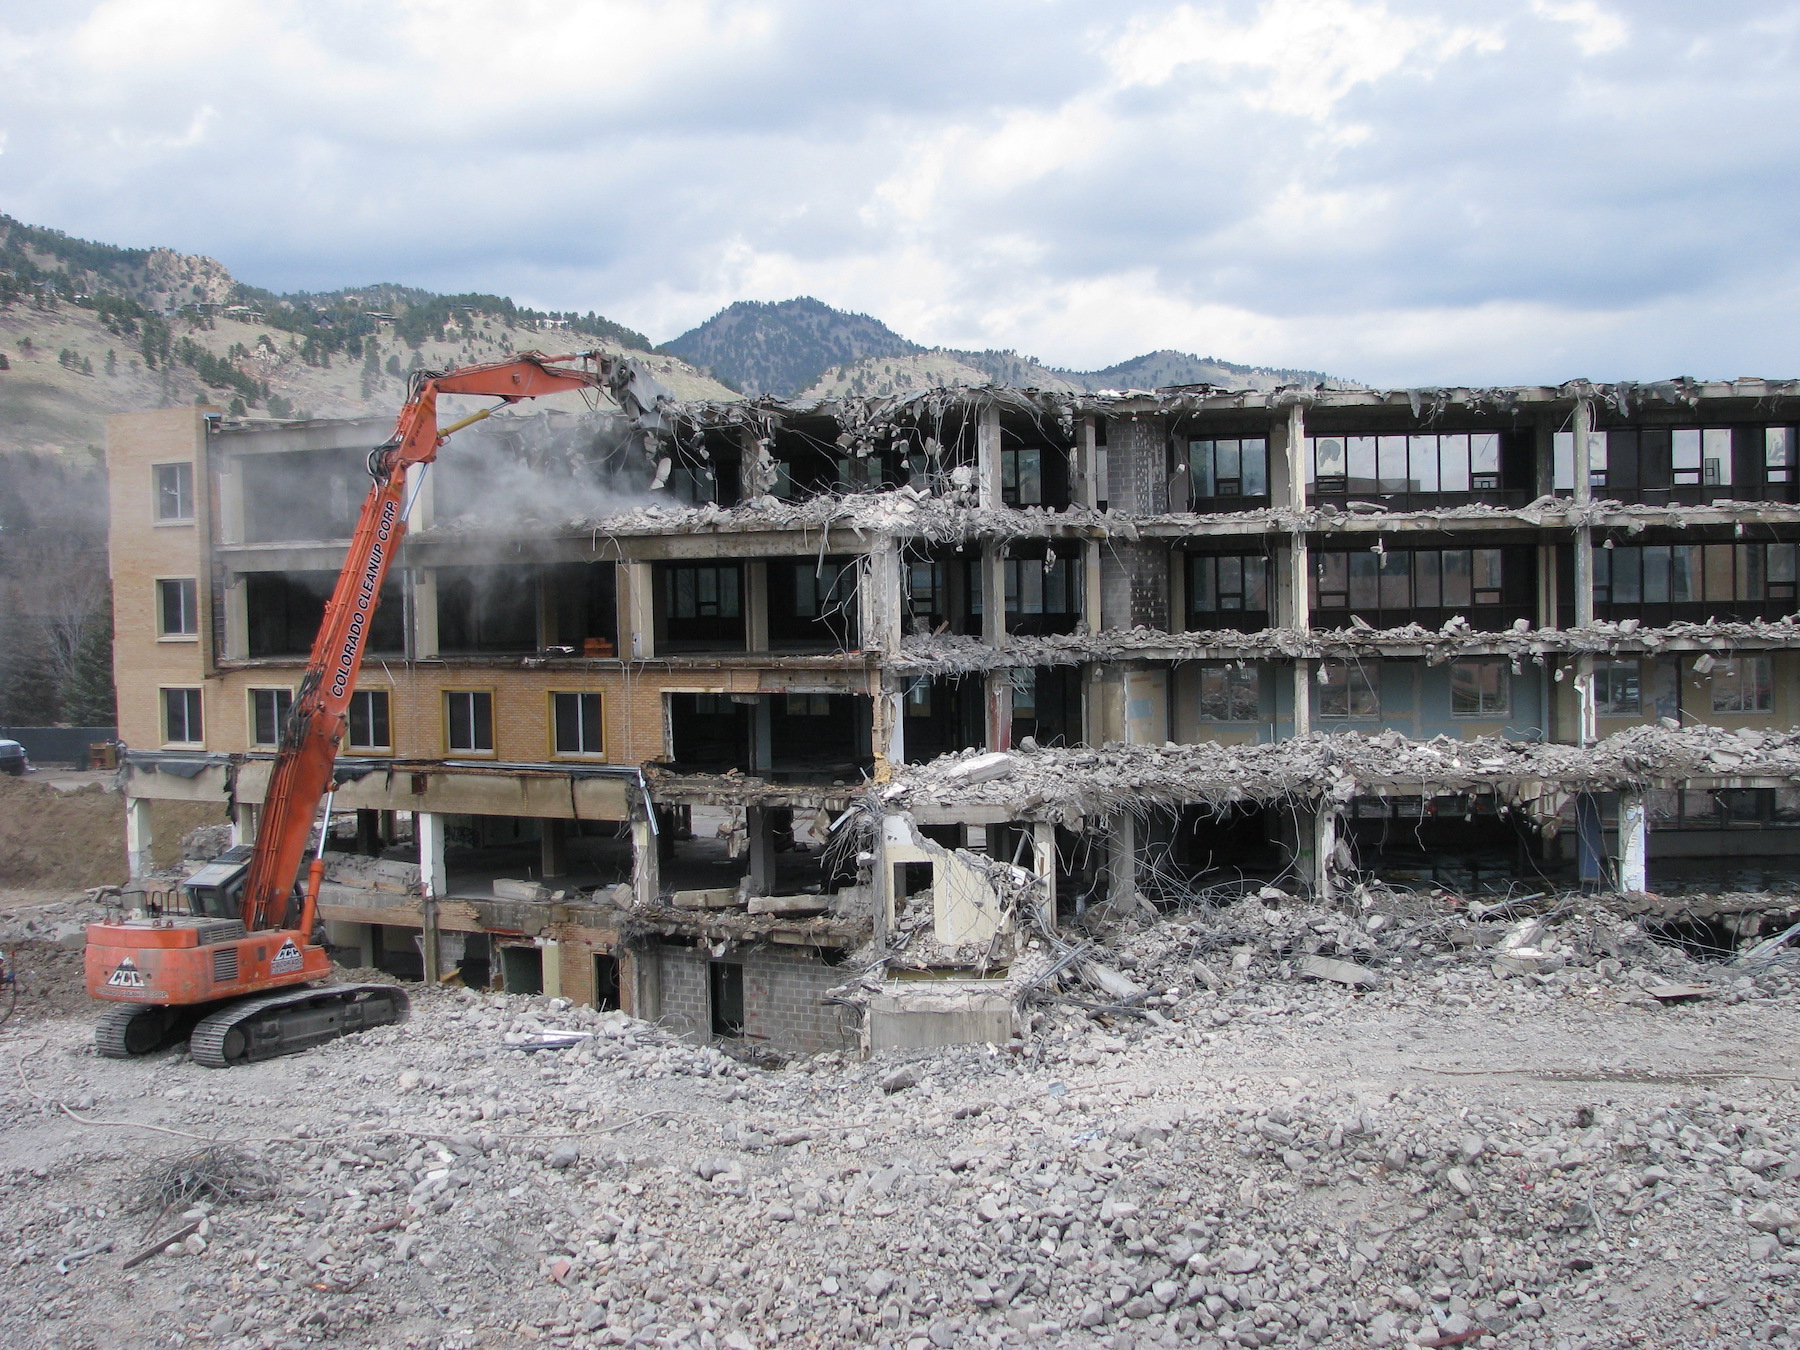 Materials from a demolished hospital in Colorado will be reused in new construction.